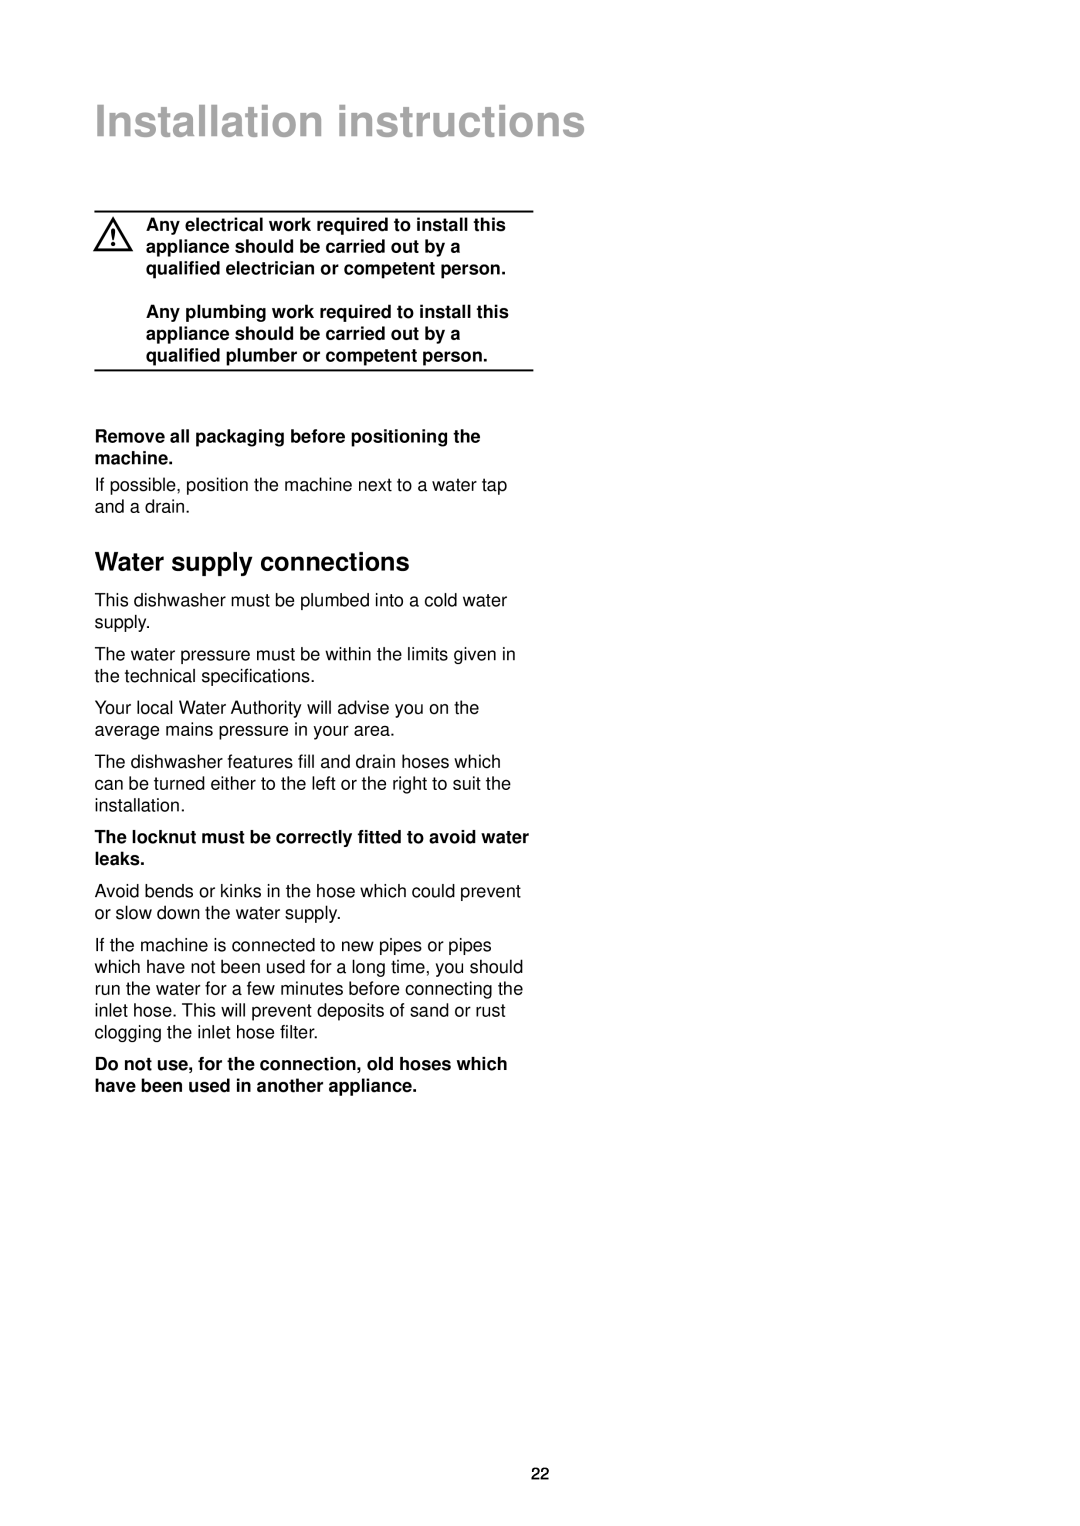 Tricity Bendix DH 101 manual Installation instructions, Water supply connections 